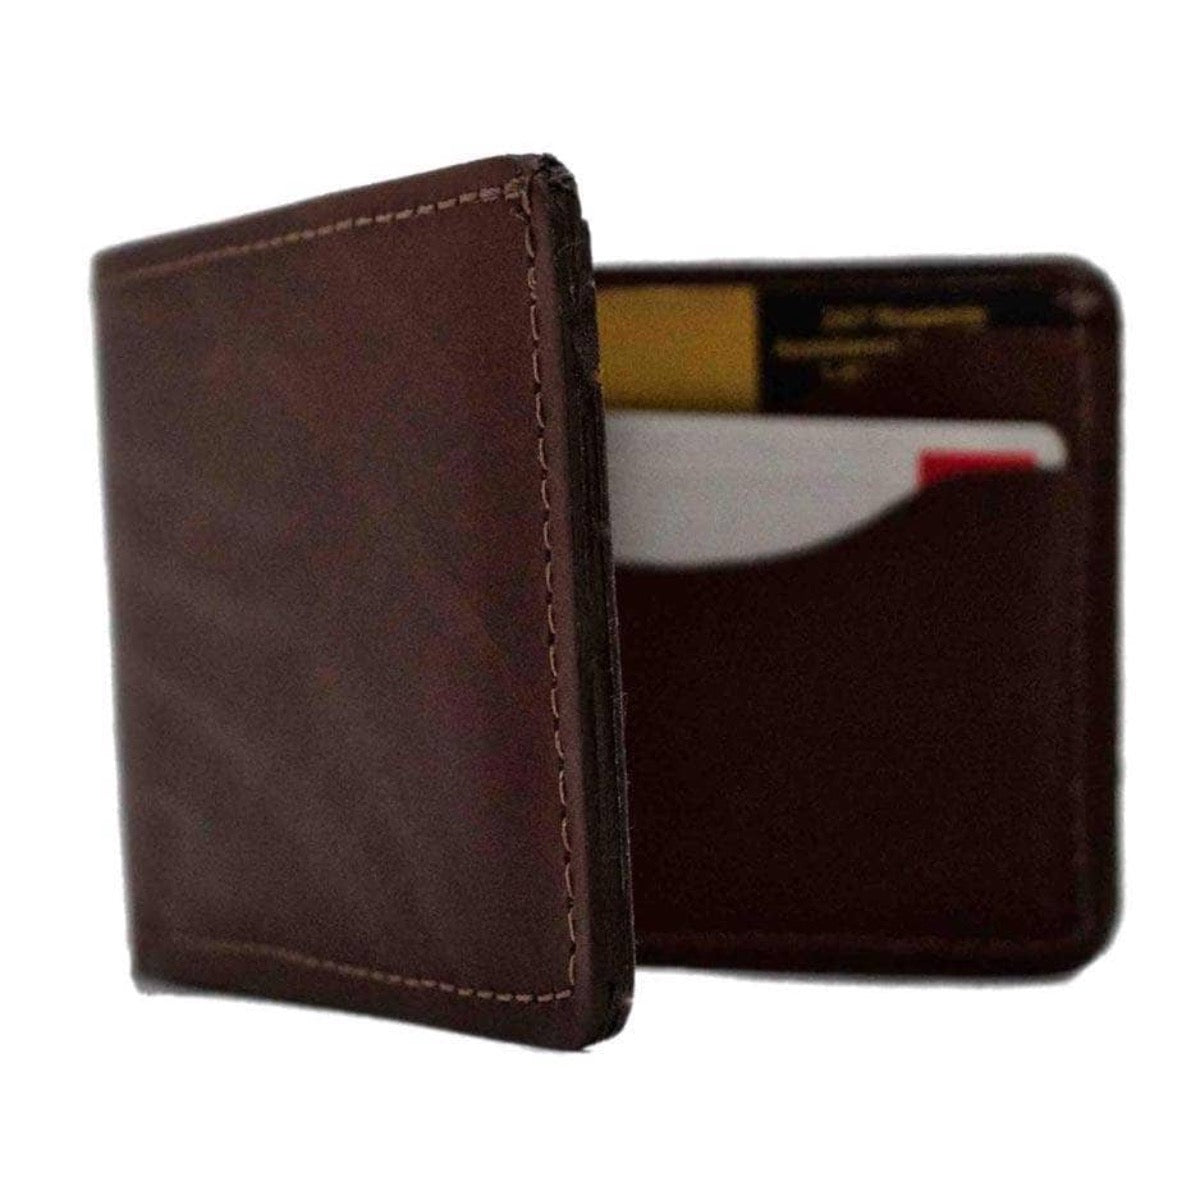 Charleston Espresso Brown Leather Bifold Wallet partially open with cards in pockets